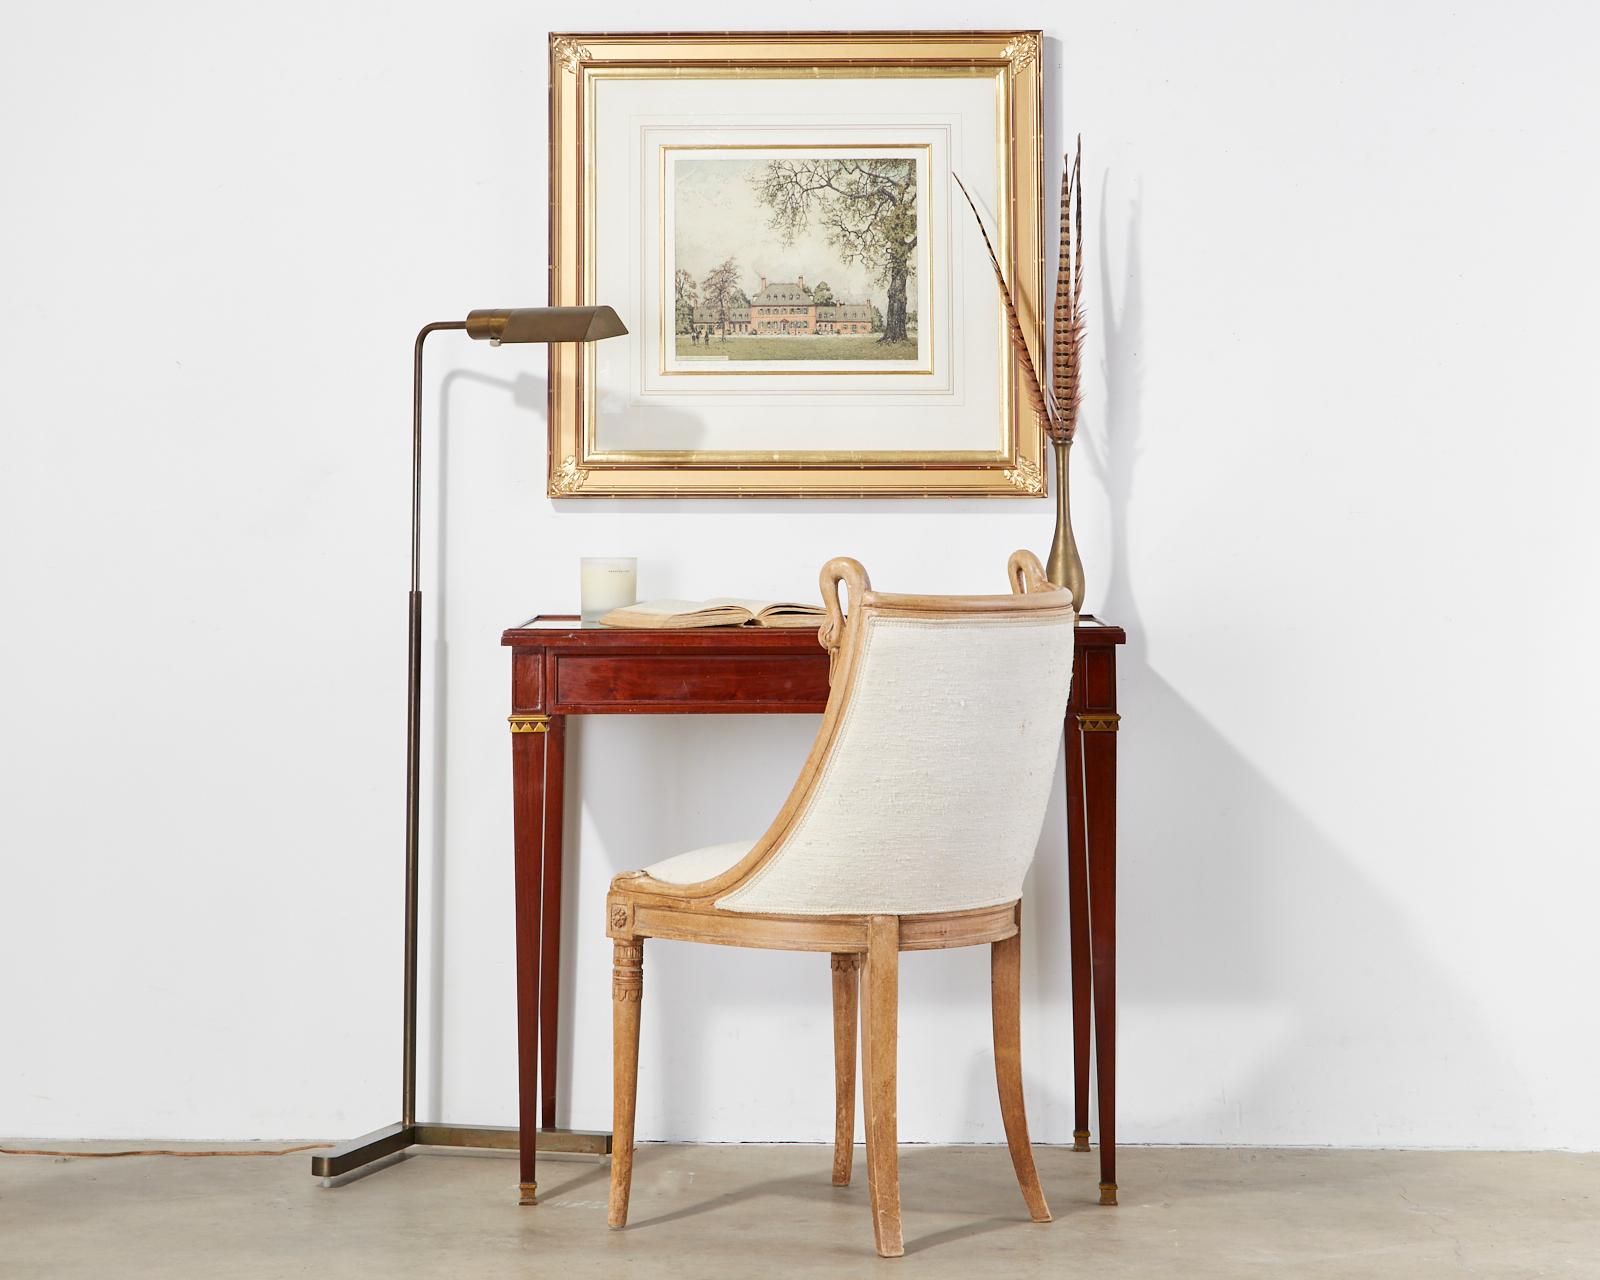 Elegant mahogany and bronze mounted writing table by Maison Jansen. Features a diminutive size leather topped case covered with a pane of glass. Crafted in the neoclassical directoire taste supported by bronze mounted tapered legs ending with